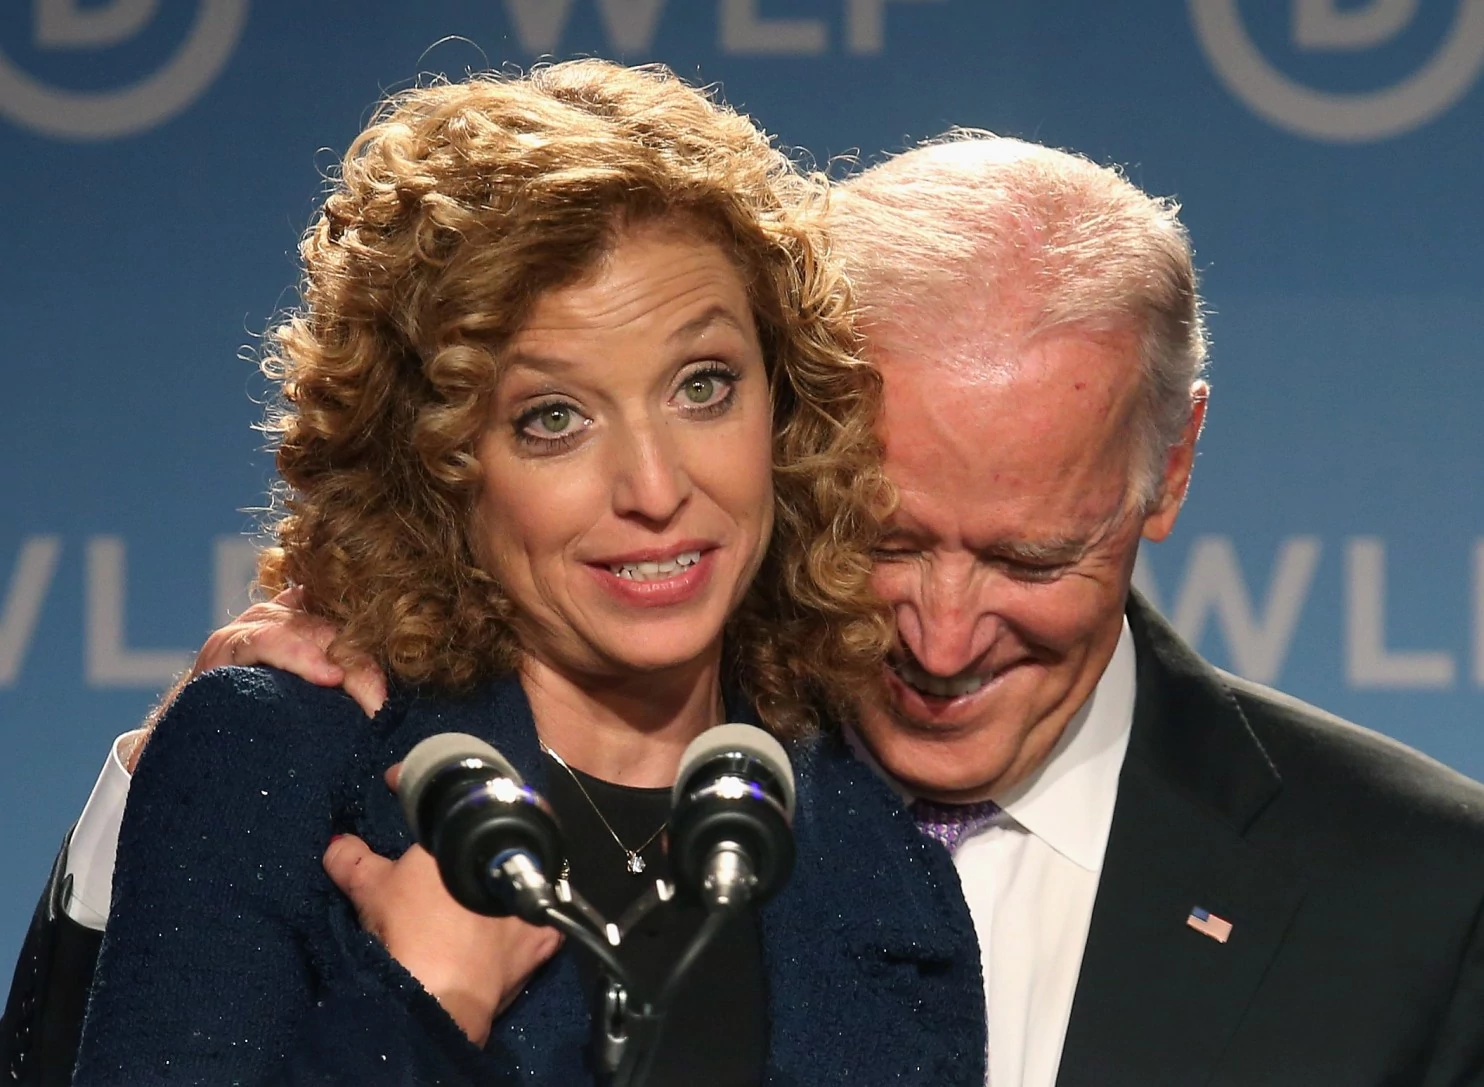 Debbie Wasserman Schultz Debbie Wasserman Schultz39s awkward day with party leaders